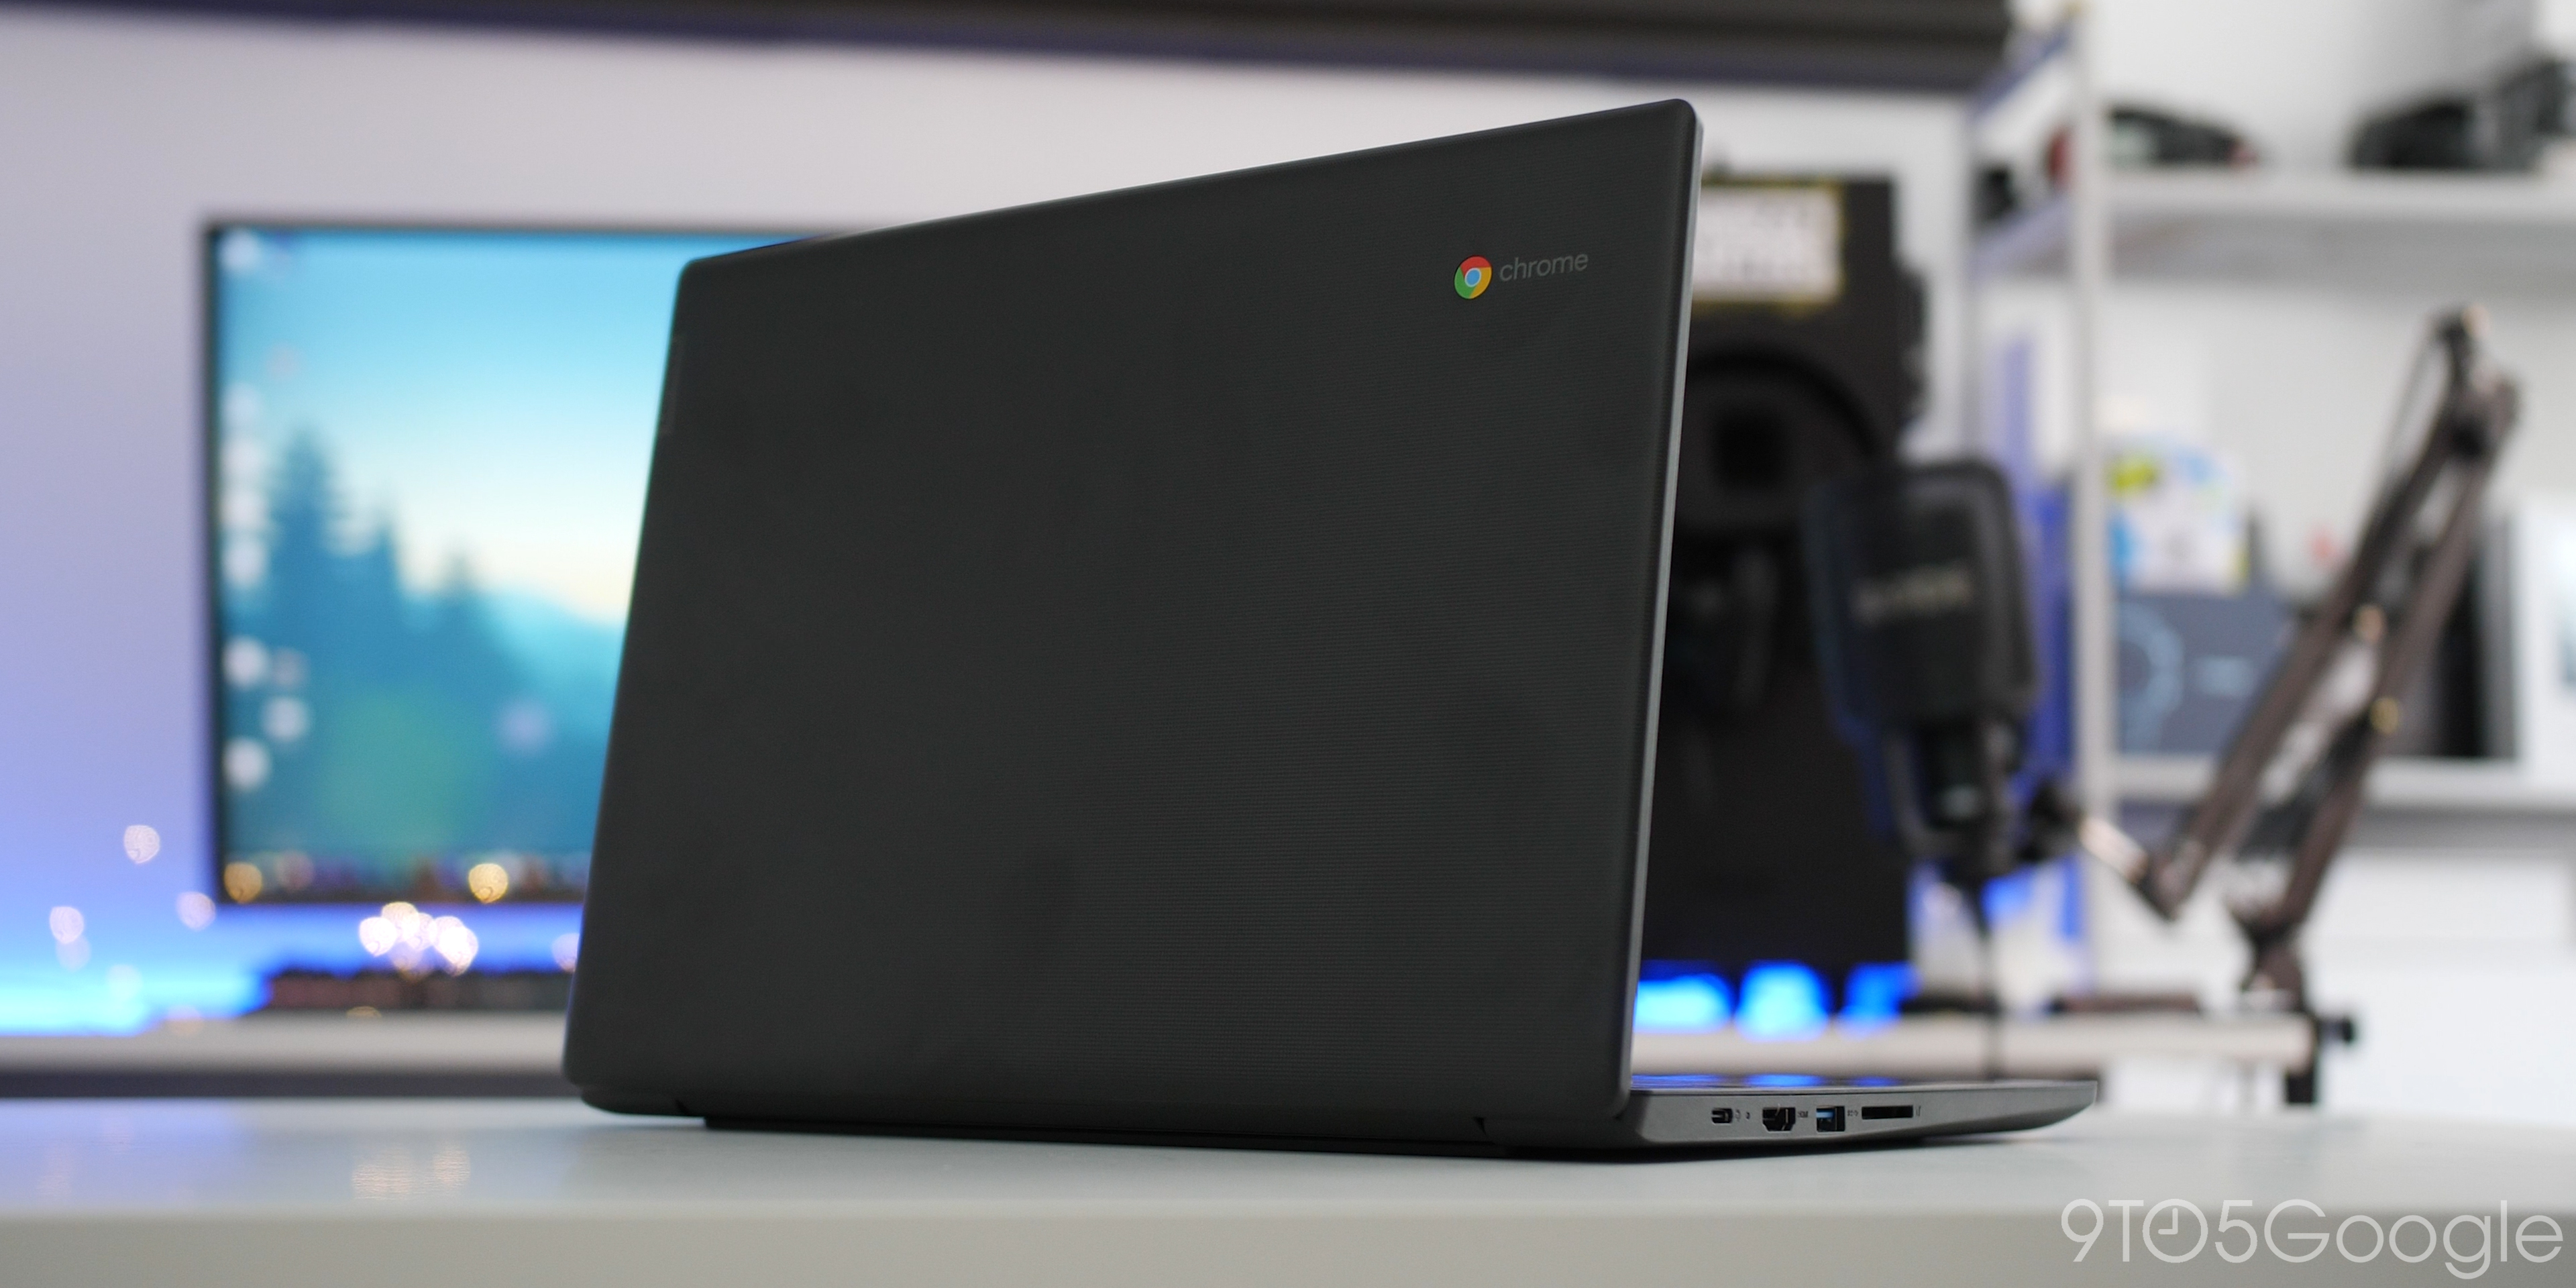 Lenovo S330 review: The benchmark for budget laptops - 9to5Google